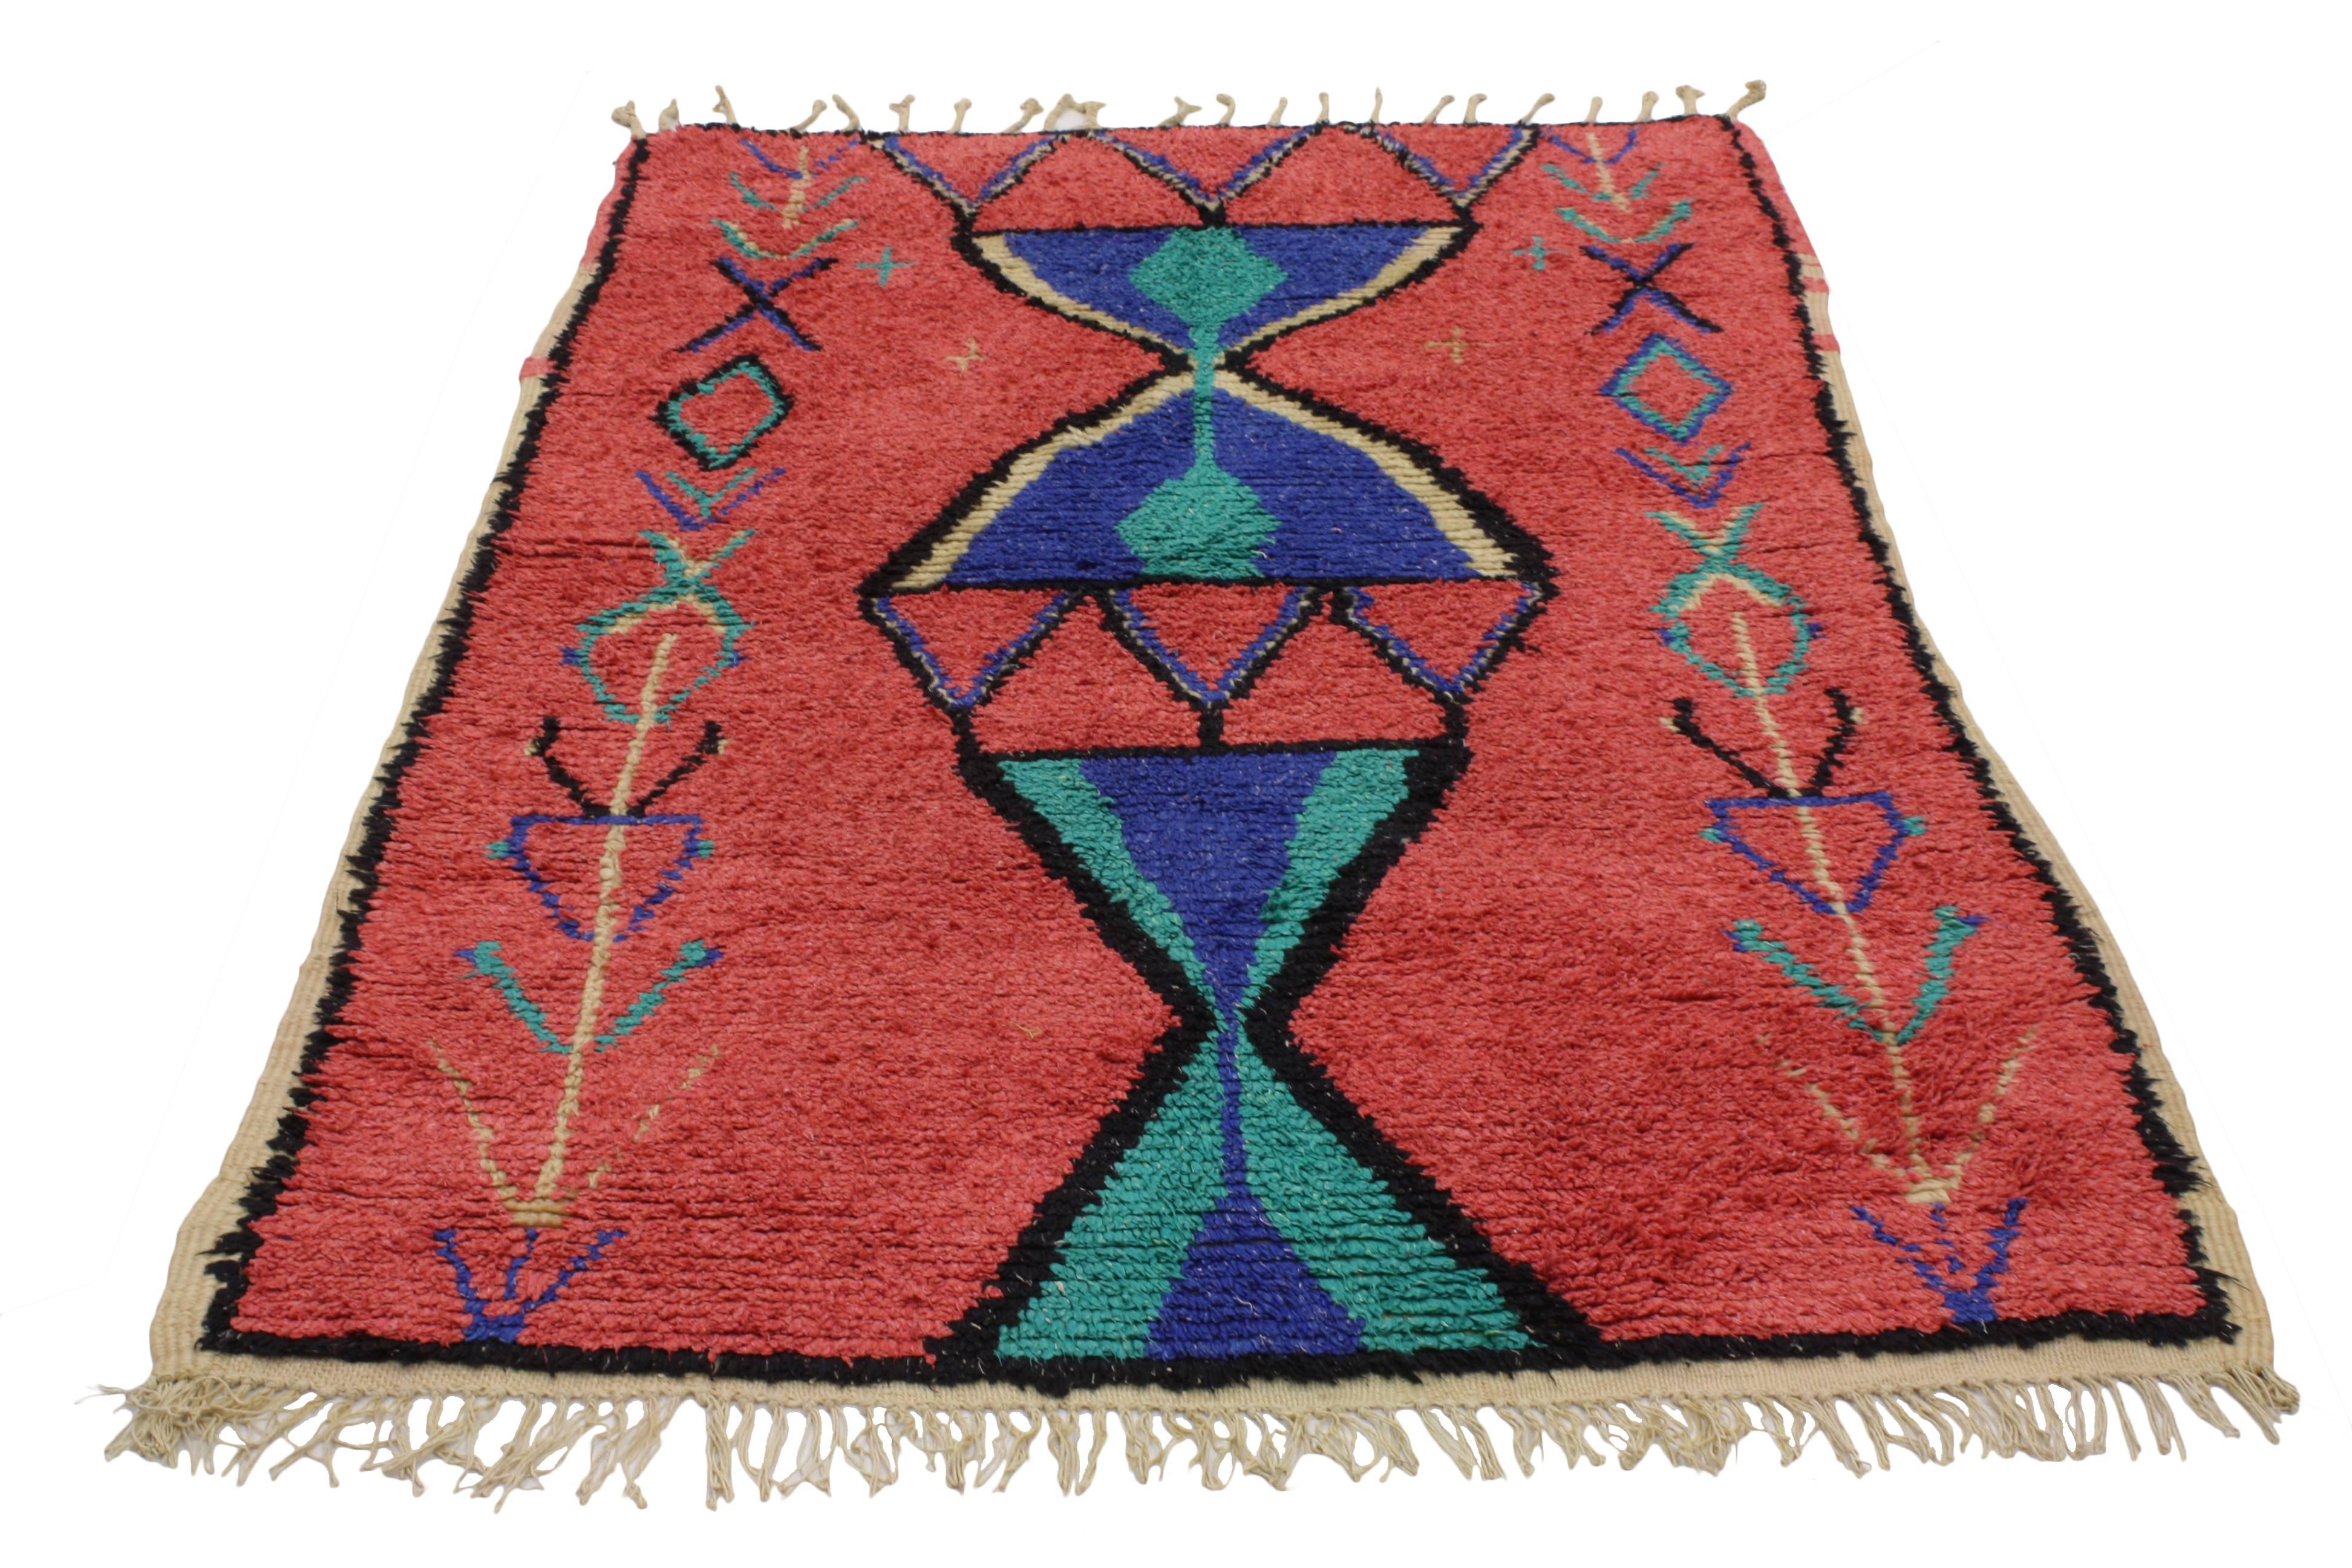 20448 Vintage Berber Moroccan Rug With Modern Tribal Design. This hand-knotted wool vintage Berber Moroccan rug features a modern tribal design. This piece is rich in ancient Berber culture, as the design displays a host of reproductive symbolism